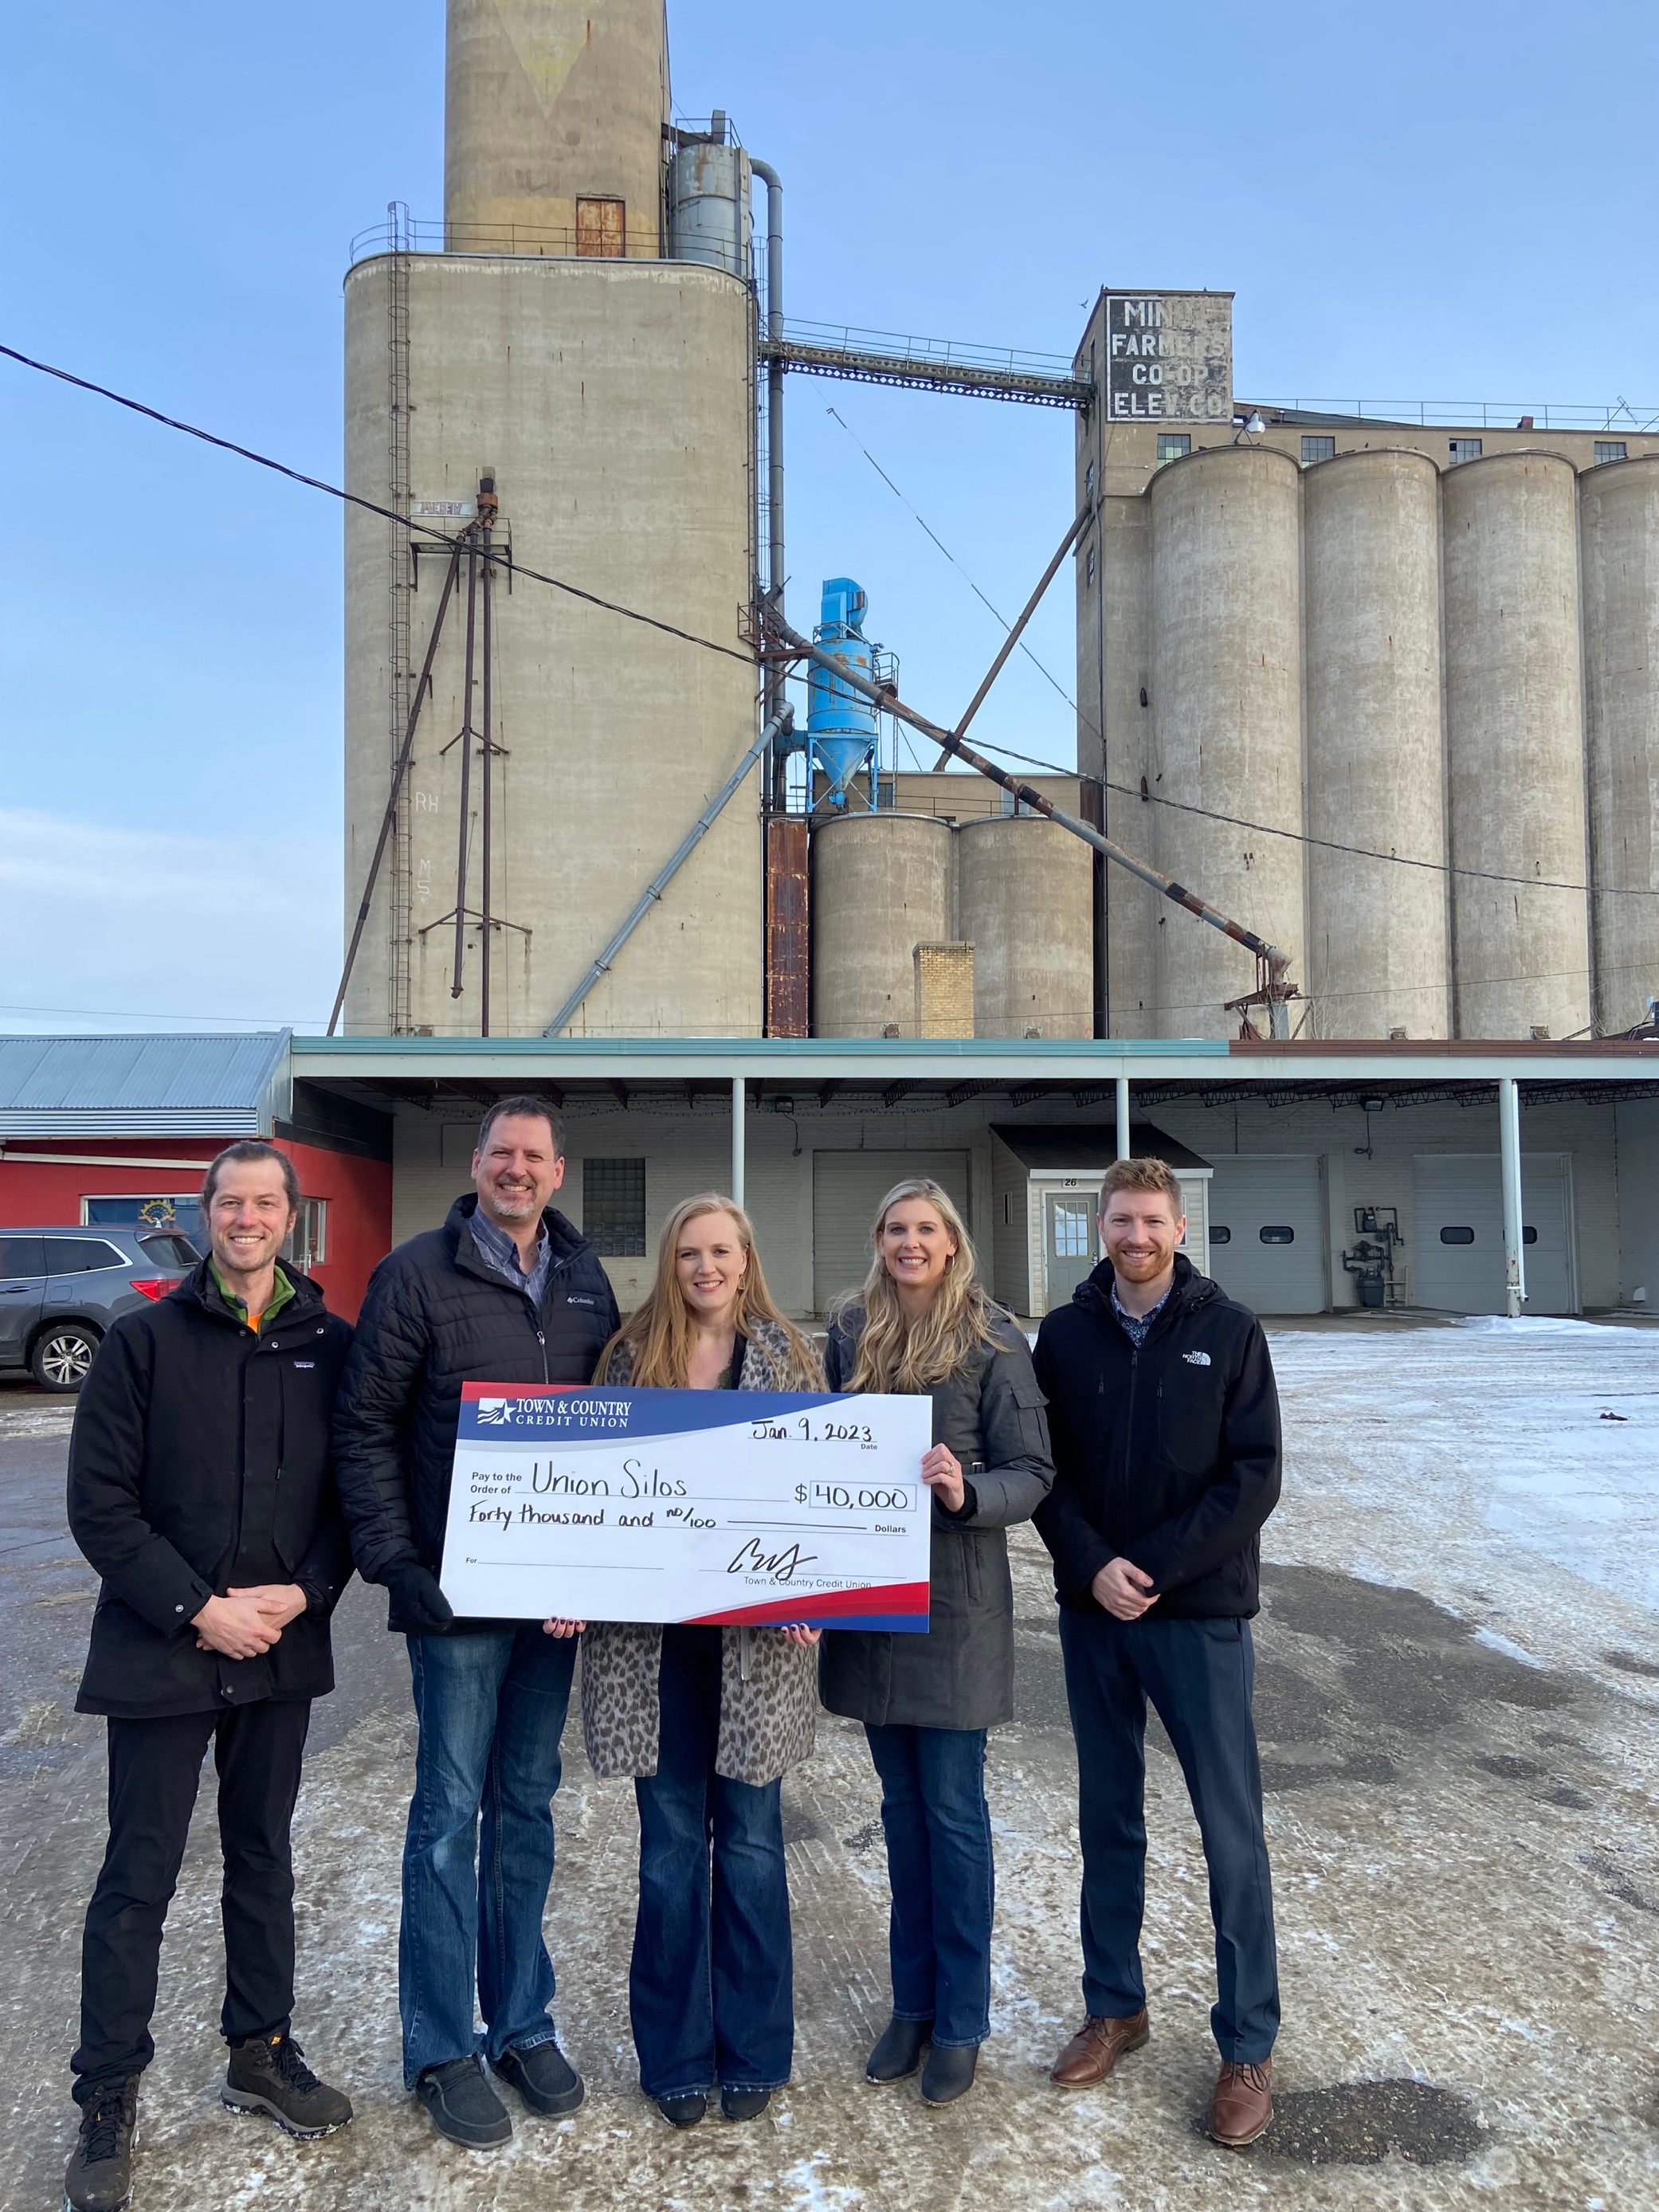 Town & Country Check Presentation to Union Silos Project